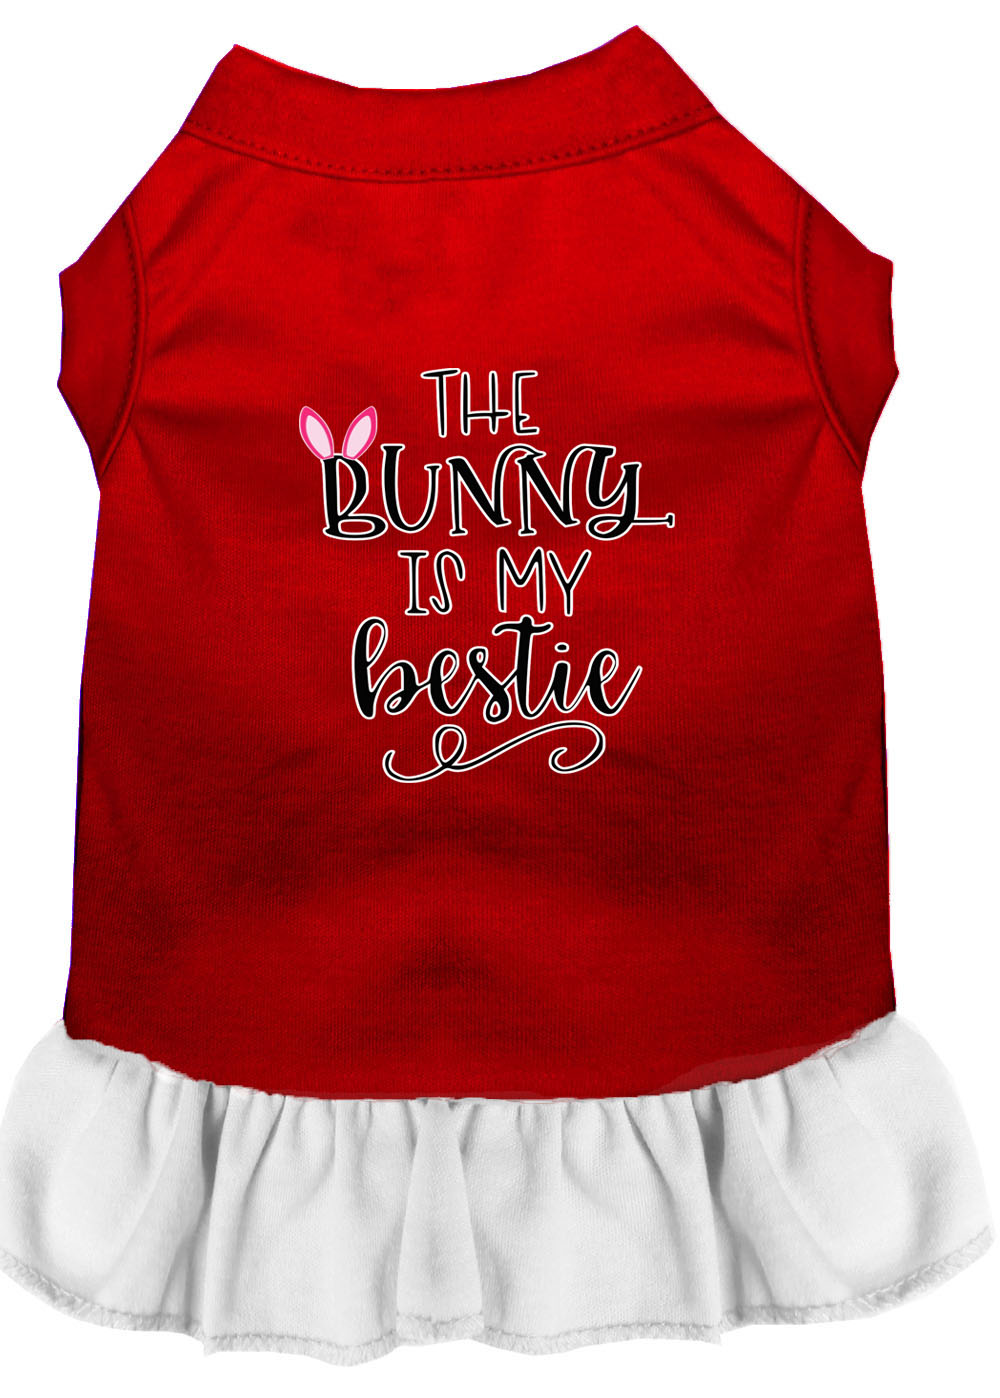 Bunny is my Bestie Screen Print Dog Dress Red with White XL